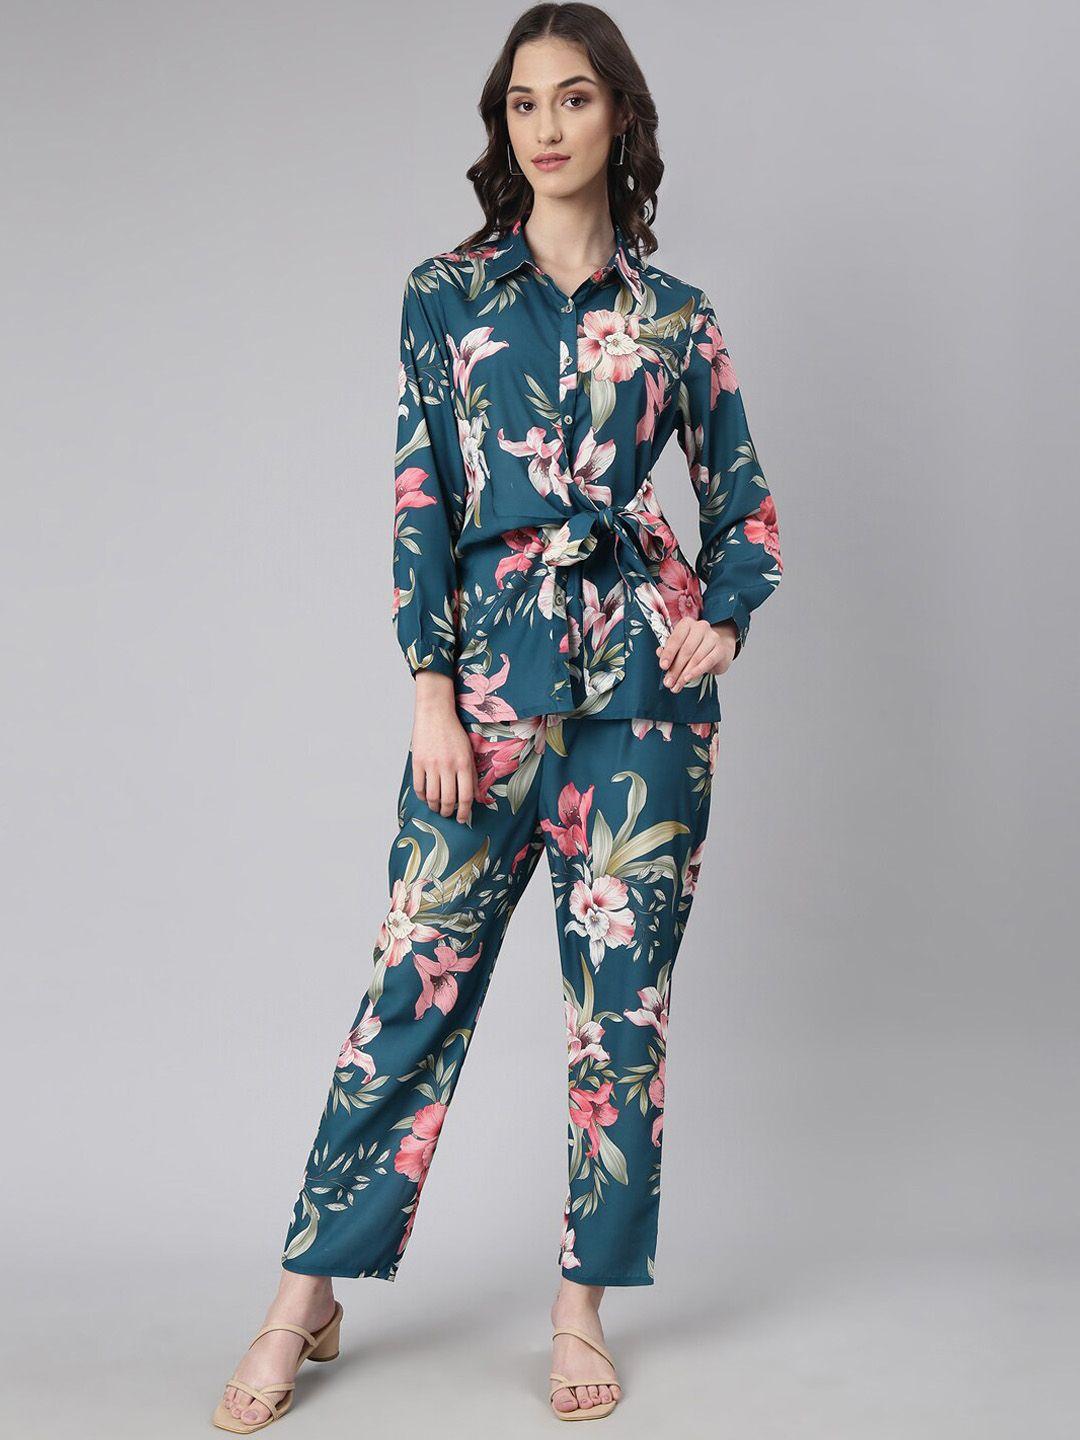 showoff floral printed shirt with printed trouser